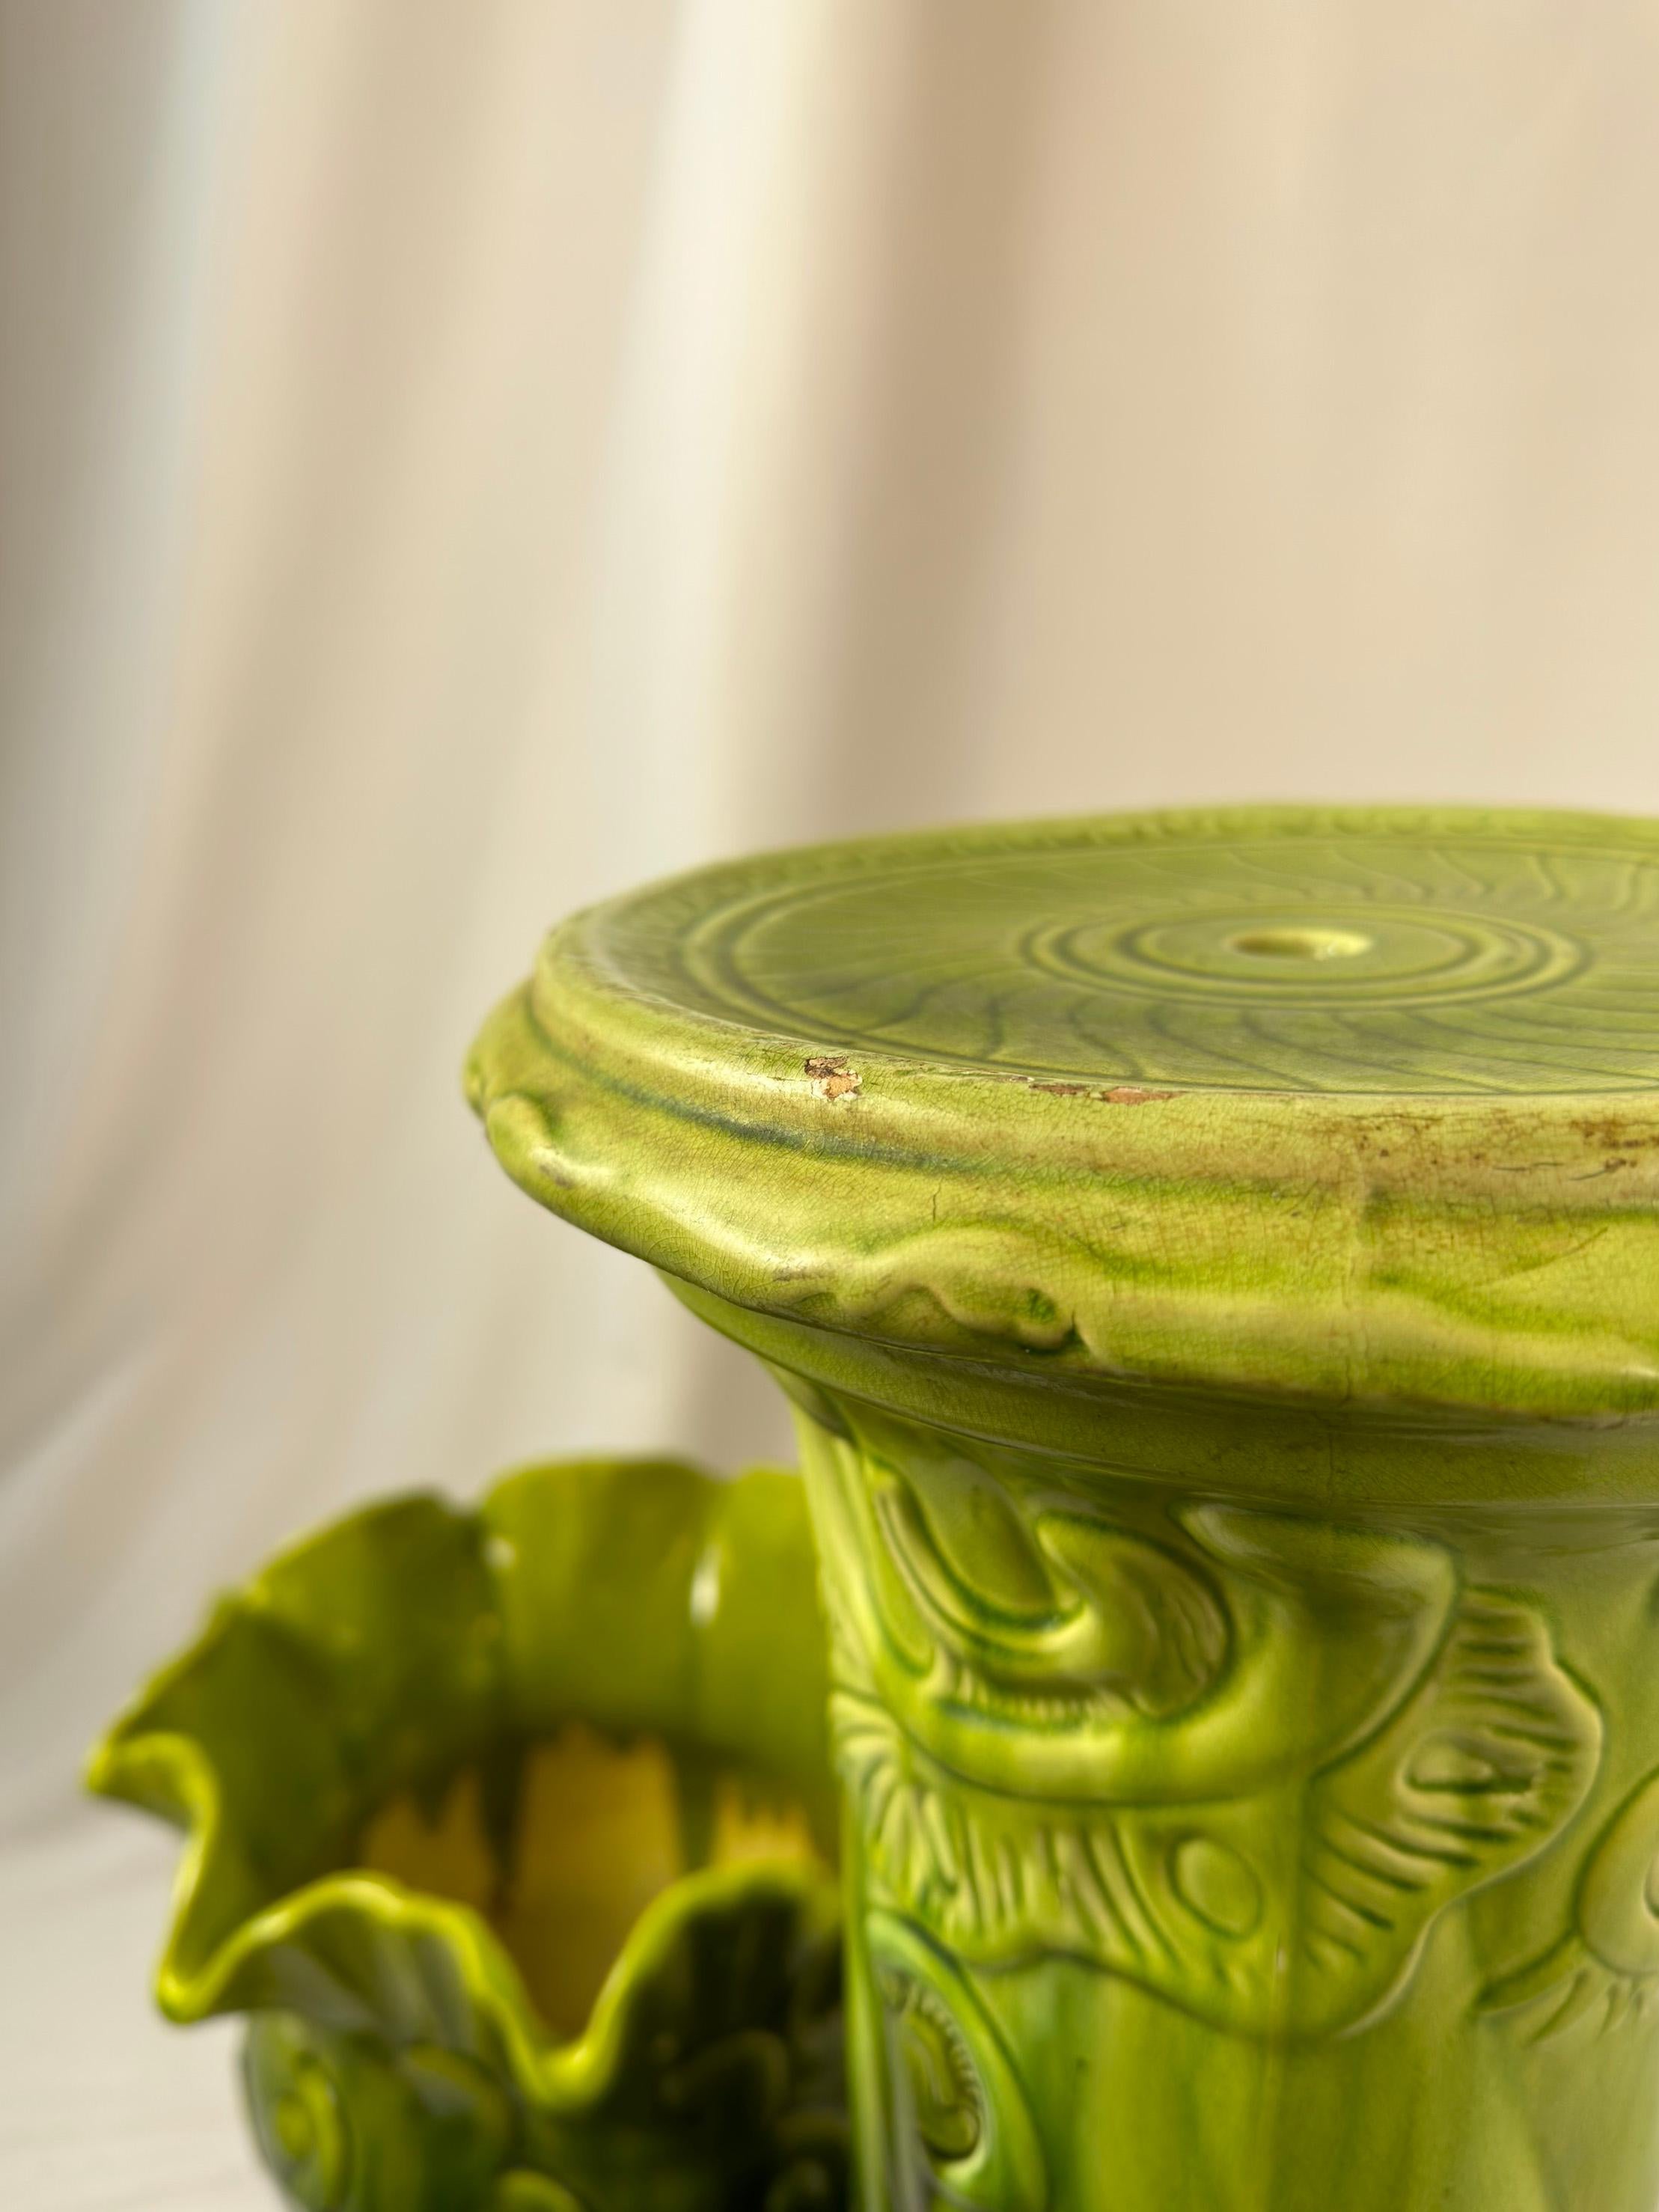 Victorian, Majolica Jardiniere - Green Pottery Planter and Pedestal by Bretby In Good Condition For Sale In Glasgow, GB